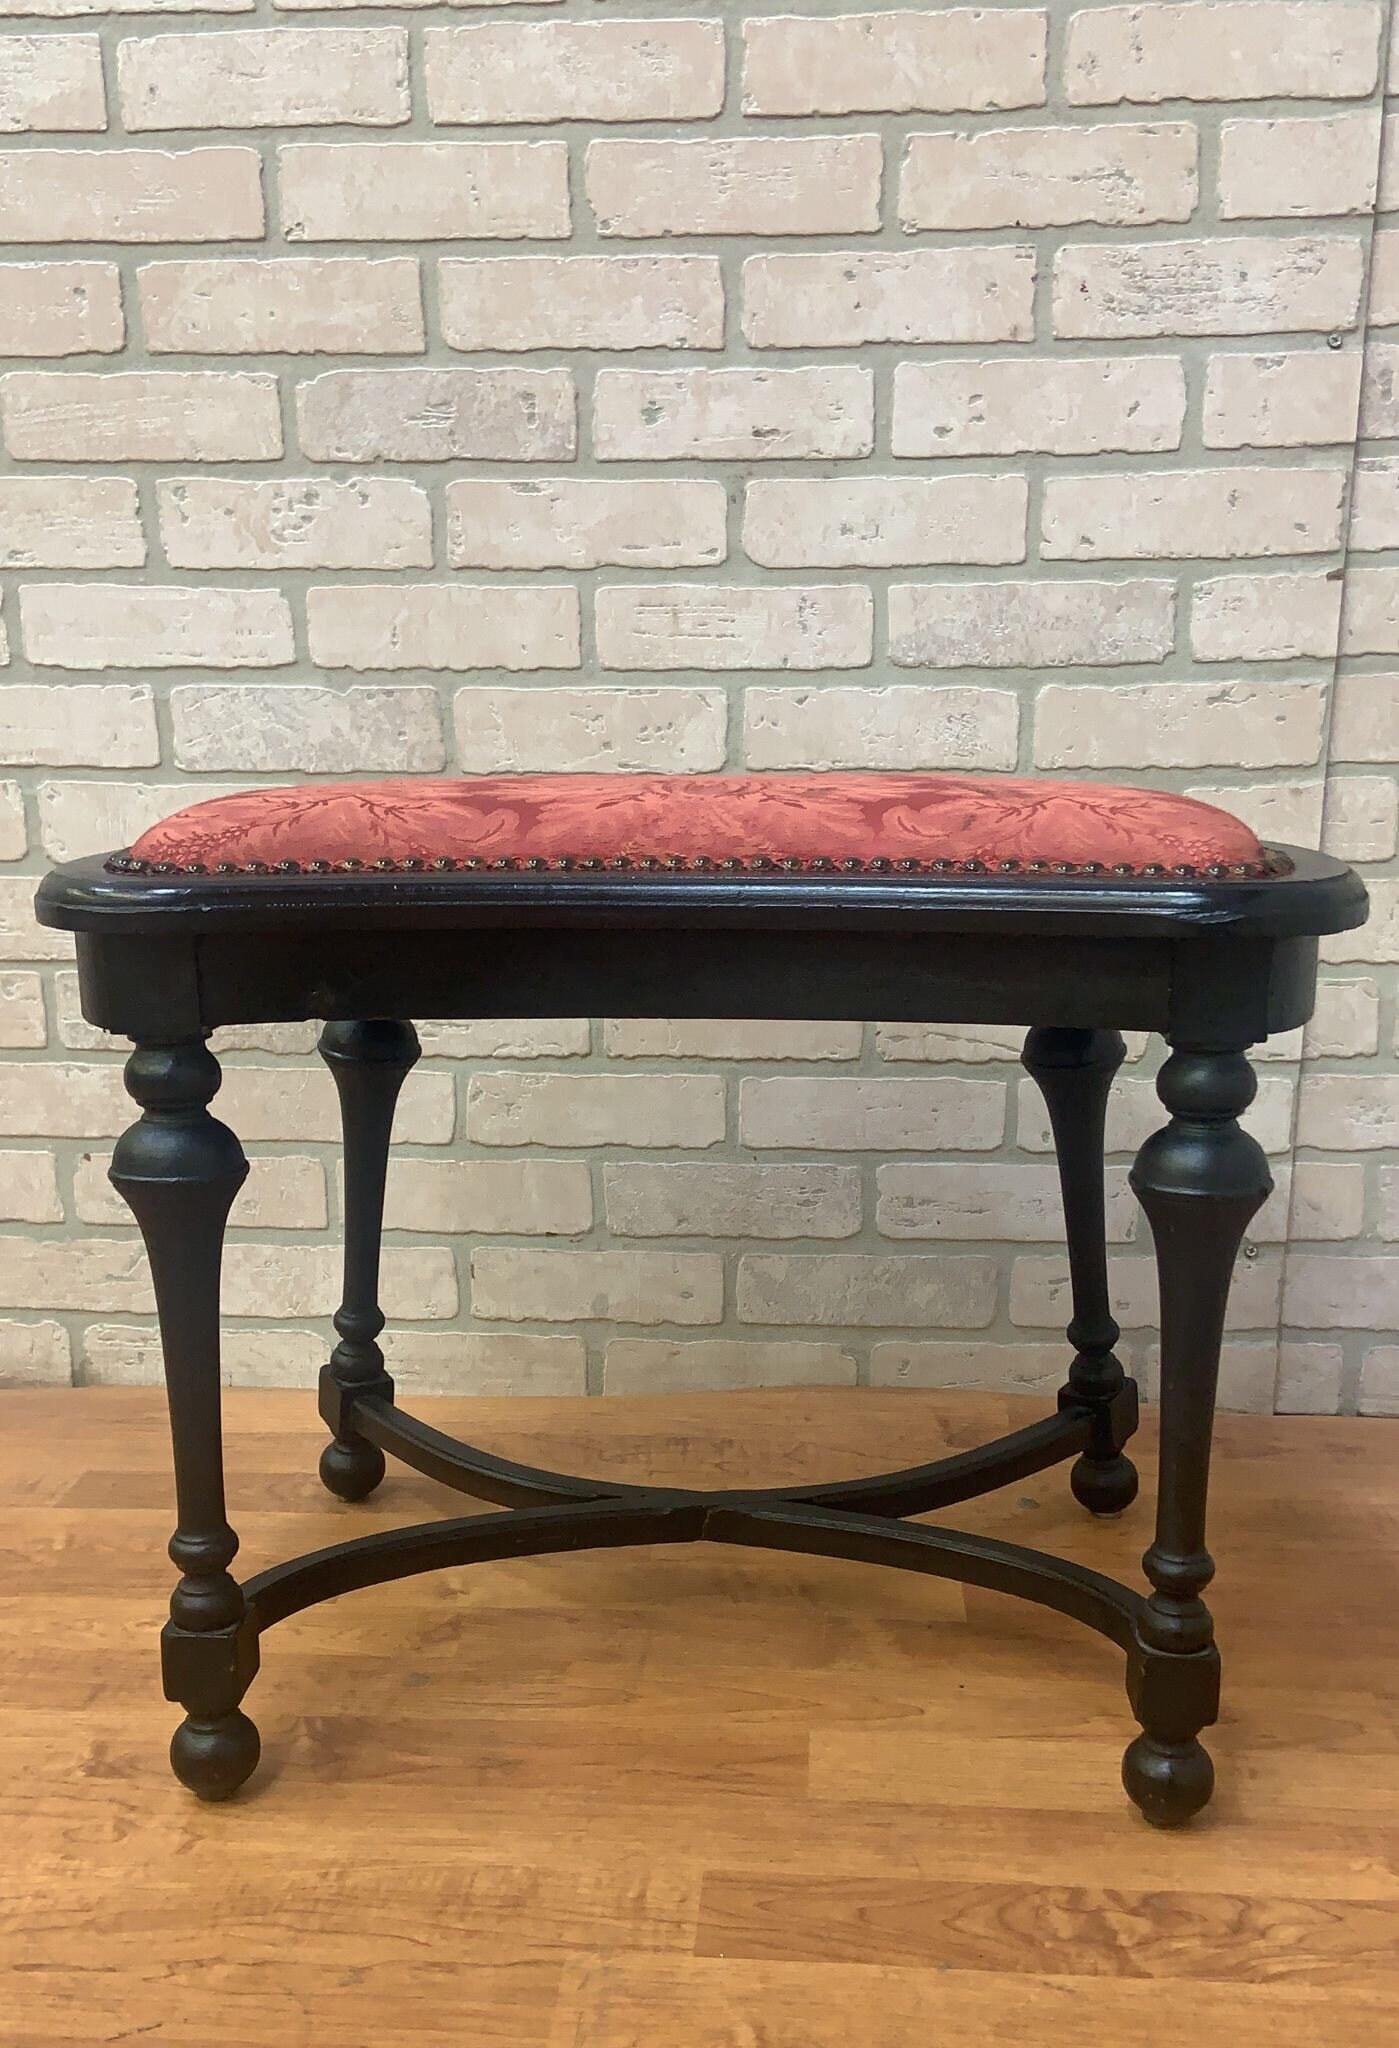 Antique Ebony Stool Bench with Nail Head Finish In Good Condition For Sale In Chicago, IL